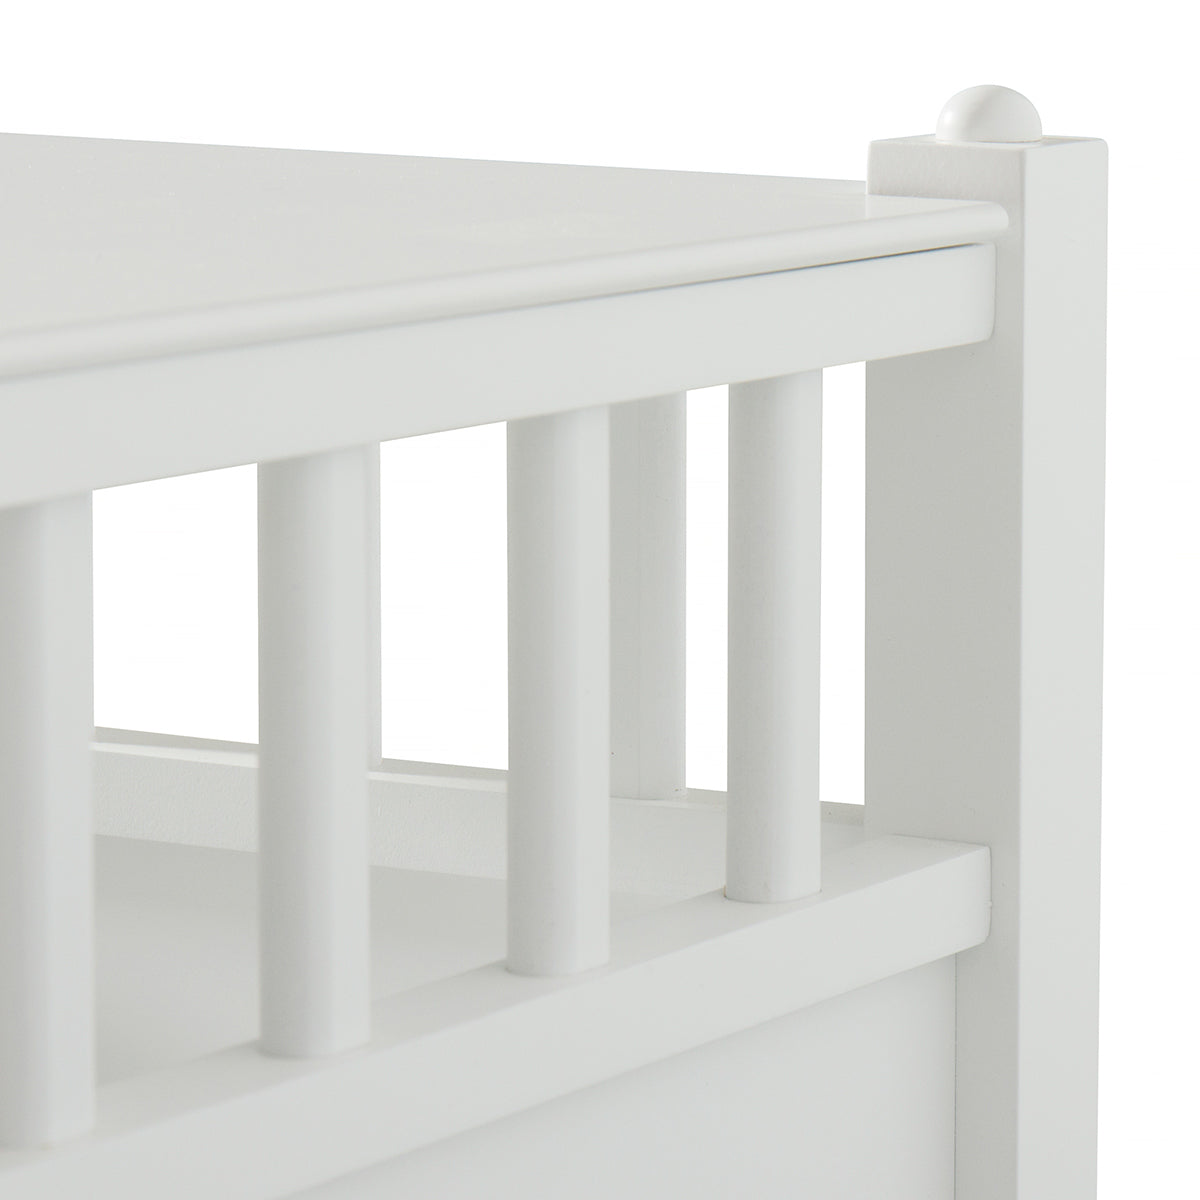 Oliver Furniture toy cube, white